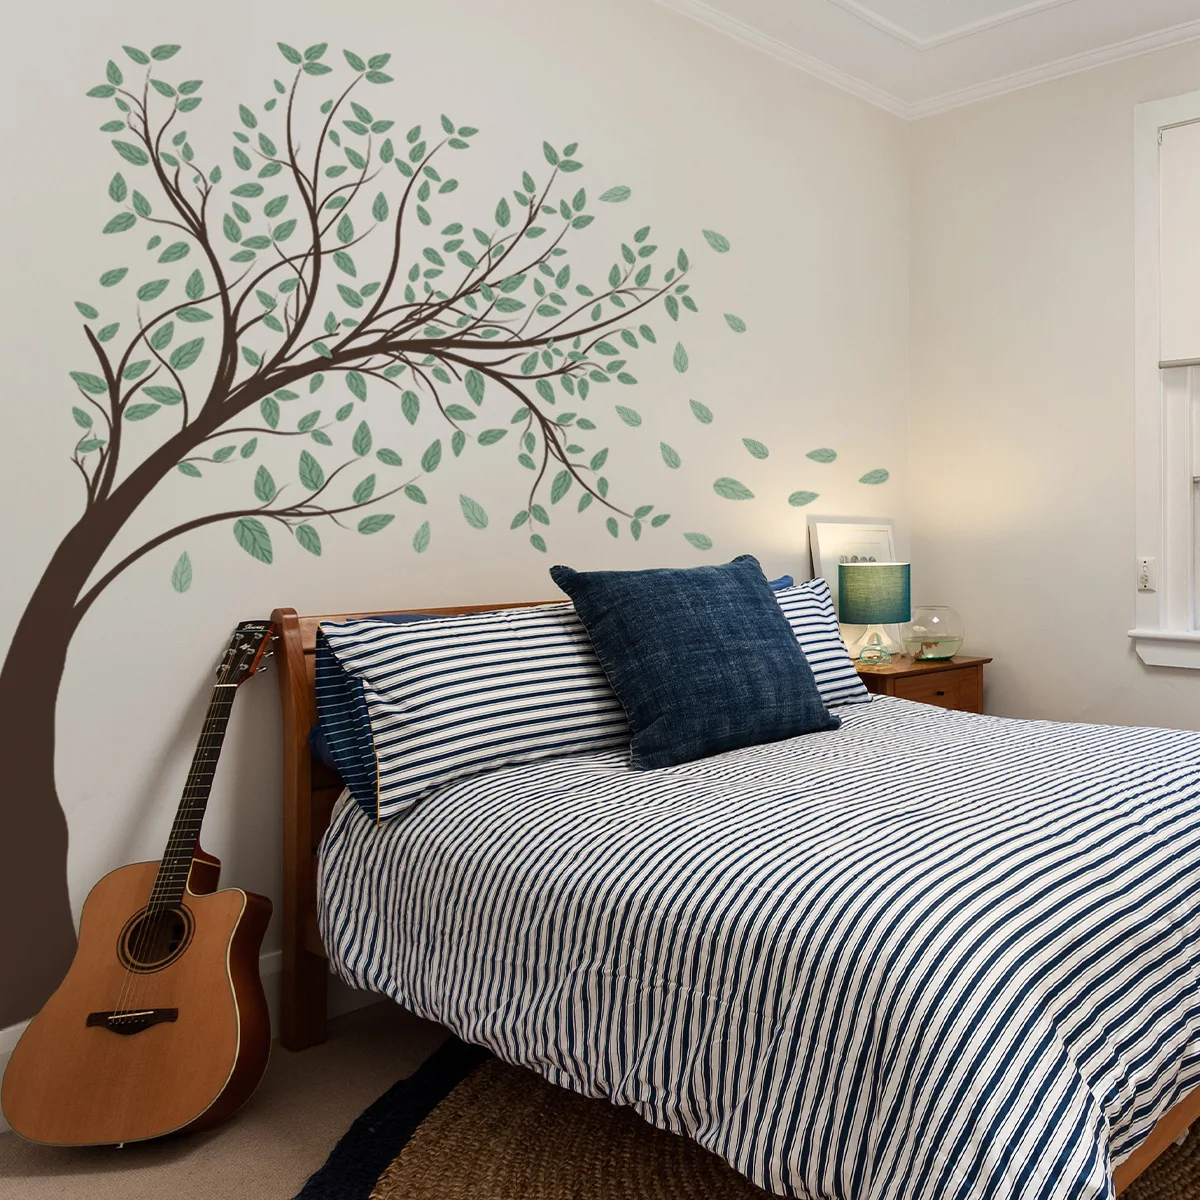 Large-Sized Fresh Green Leaf Tree Wall Stickers Decal Poster Wallpaper for Kids Room Living Room Bedroom Home Decoration Simple